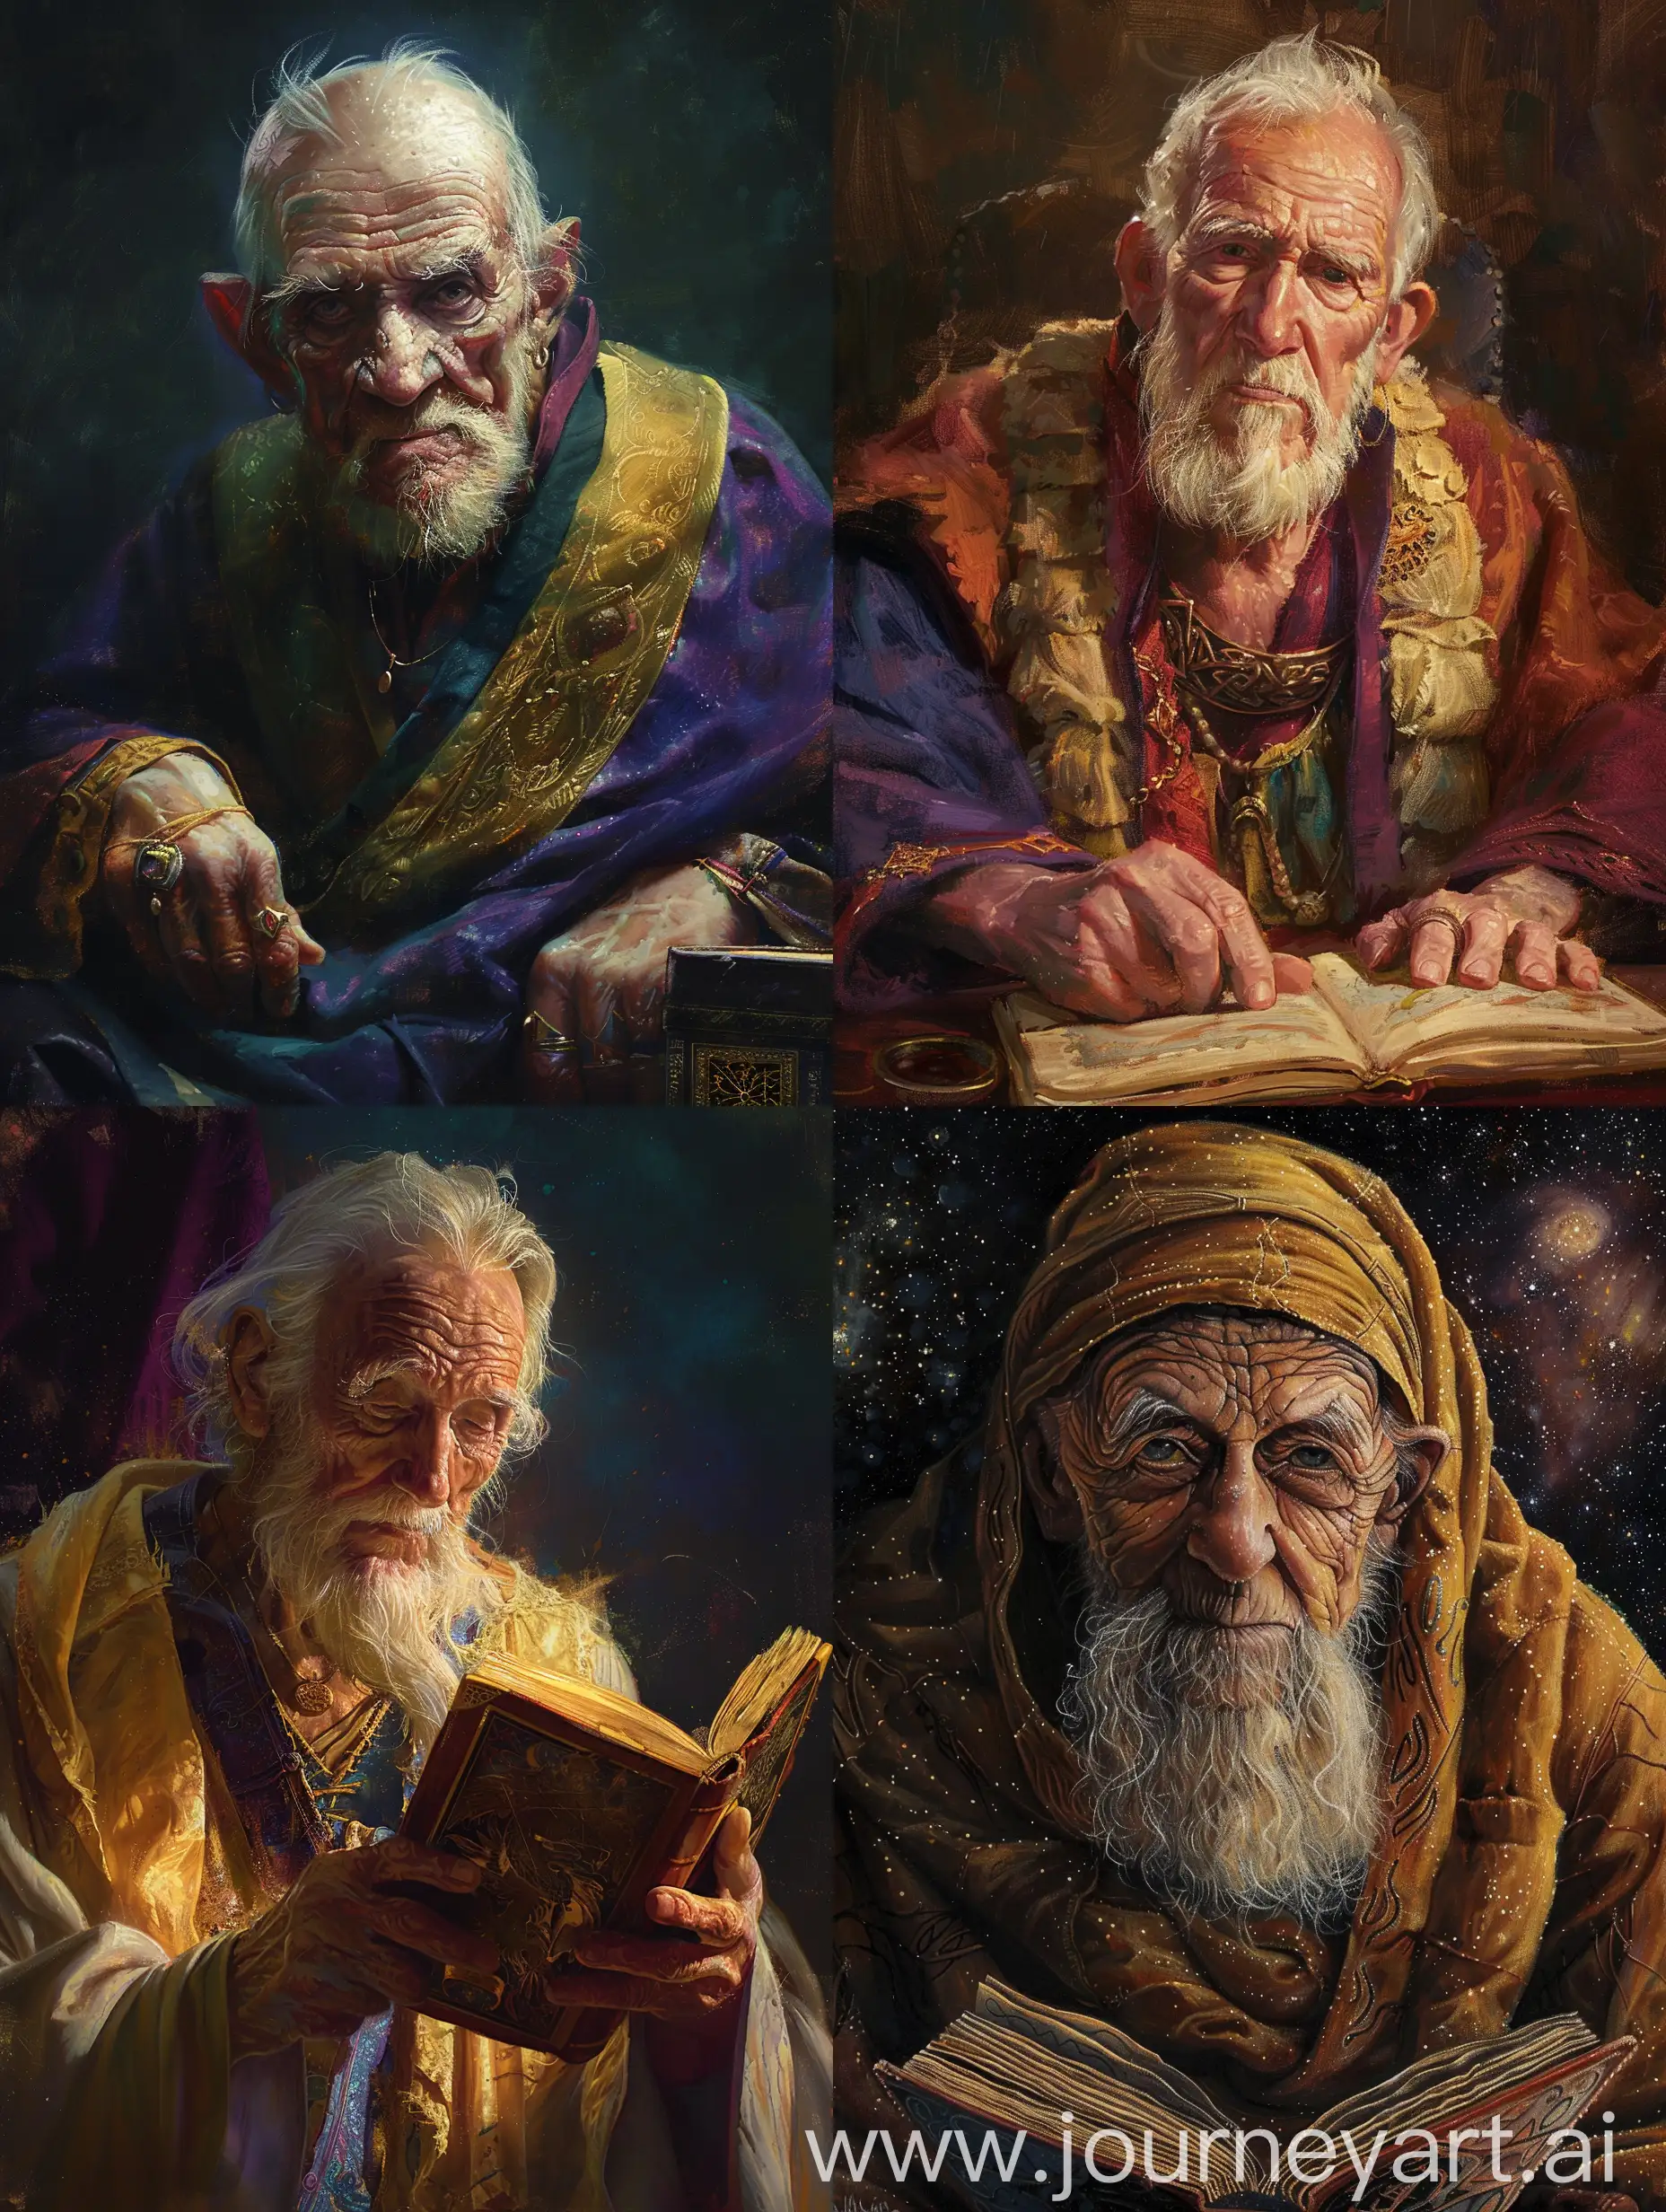 Wisdom-Embodied-Portrait-of-an-Elderly-Sage-in-Timeless-Oil-Painting-Style